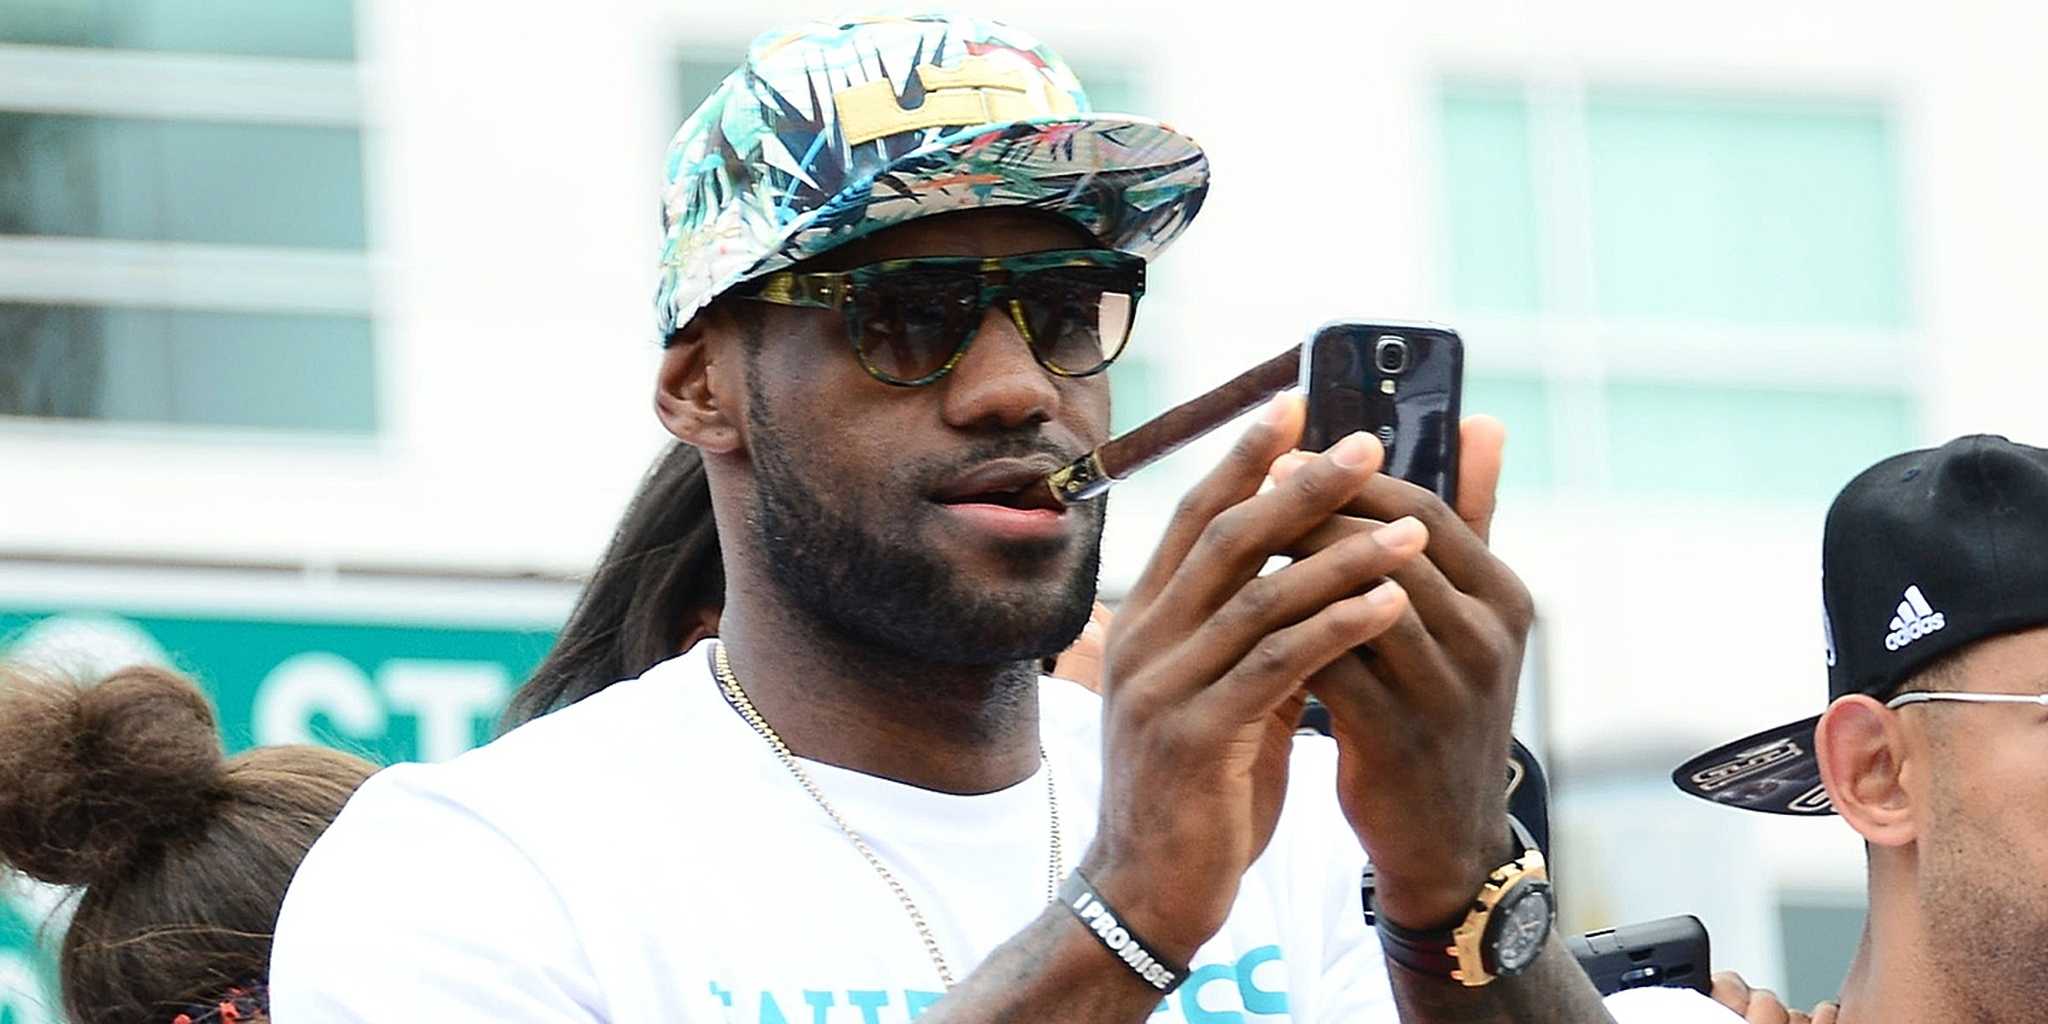  Why LeBron James has completely given up on his NBA career